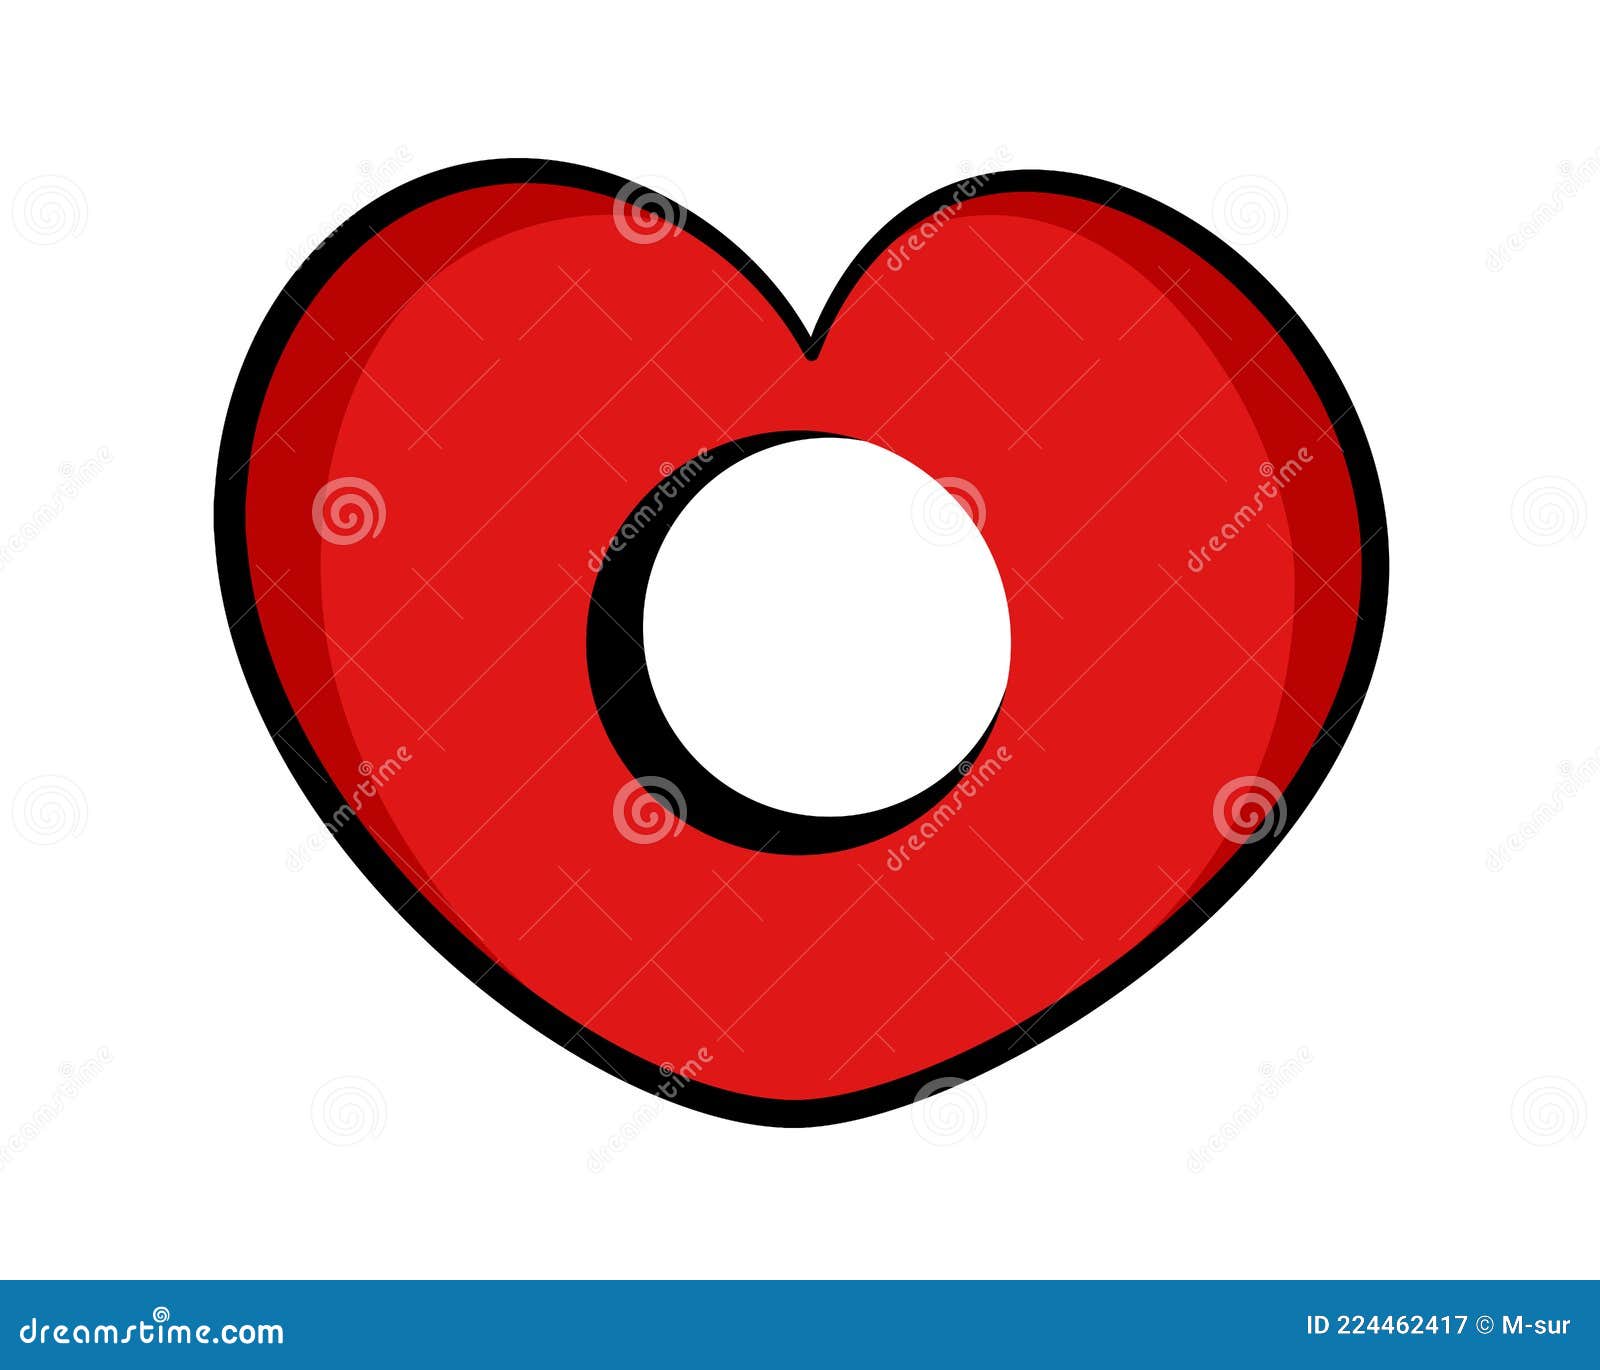 incomplete loveheart with aperture and hole in the red heart.